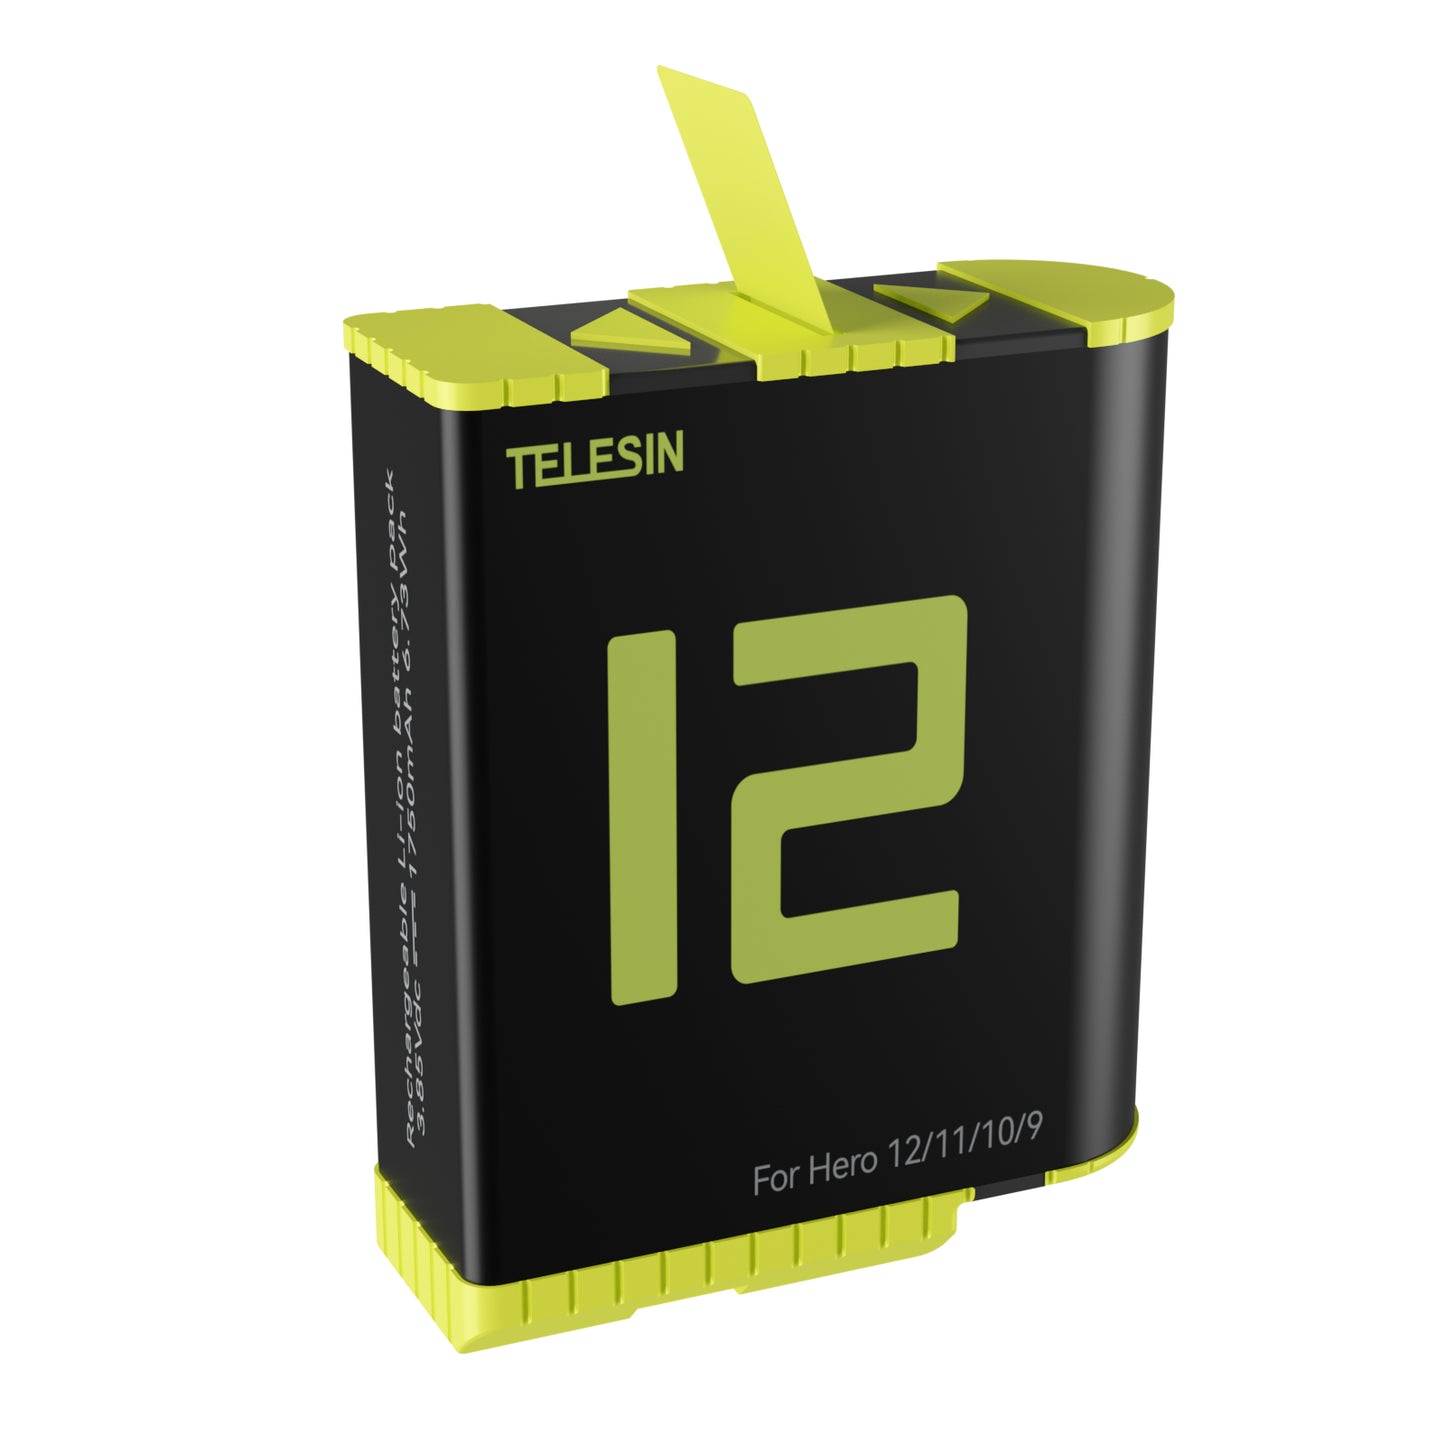 Telesin Charging box with 1 battery for GoPro 9 / 10 / 11 / 12